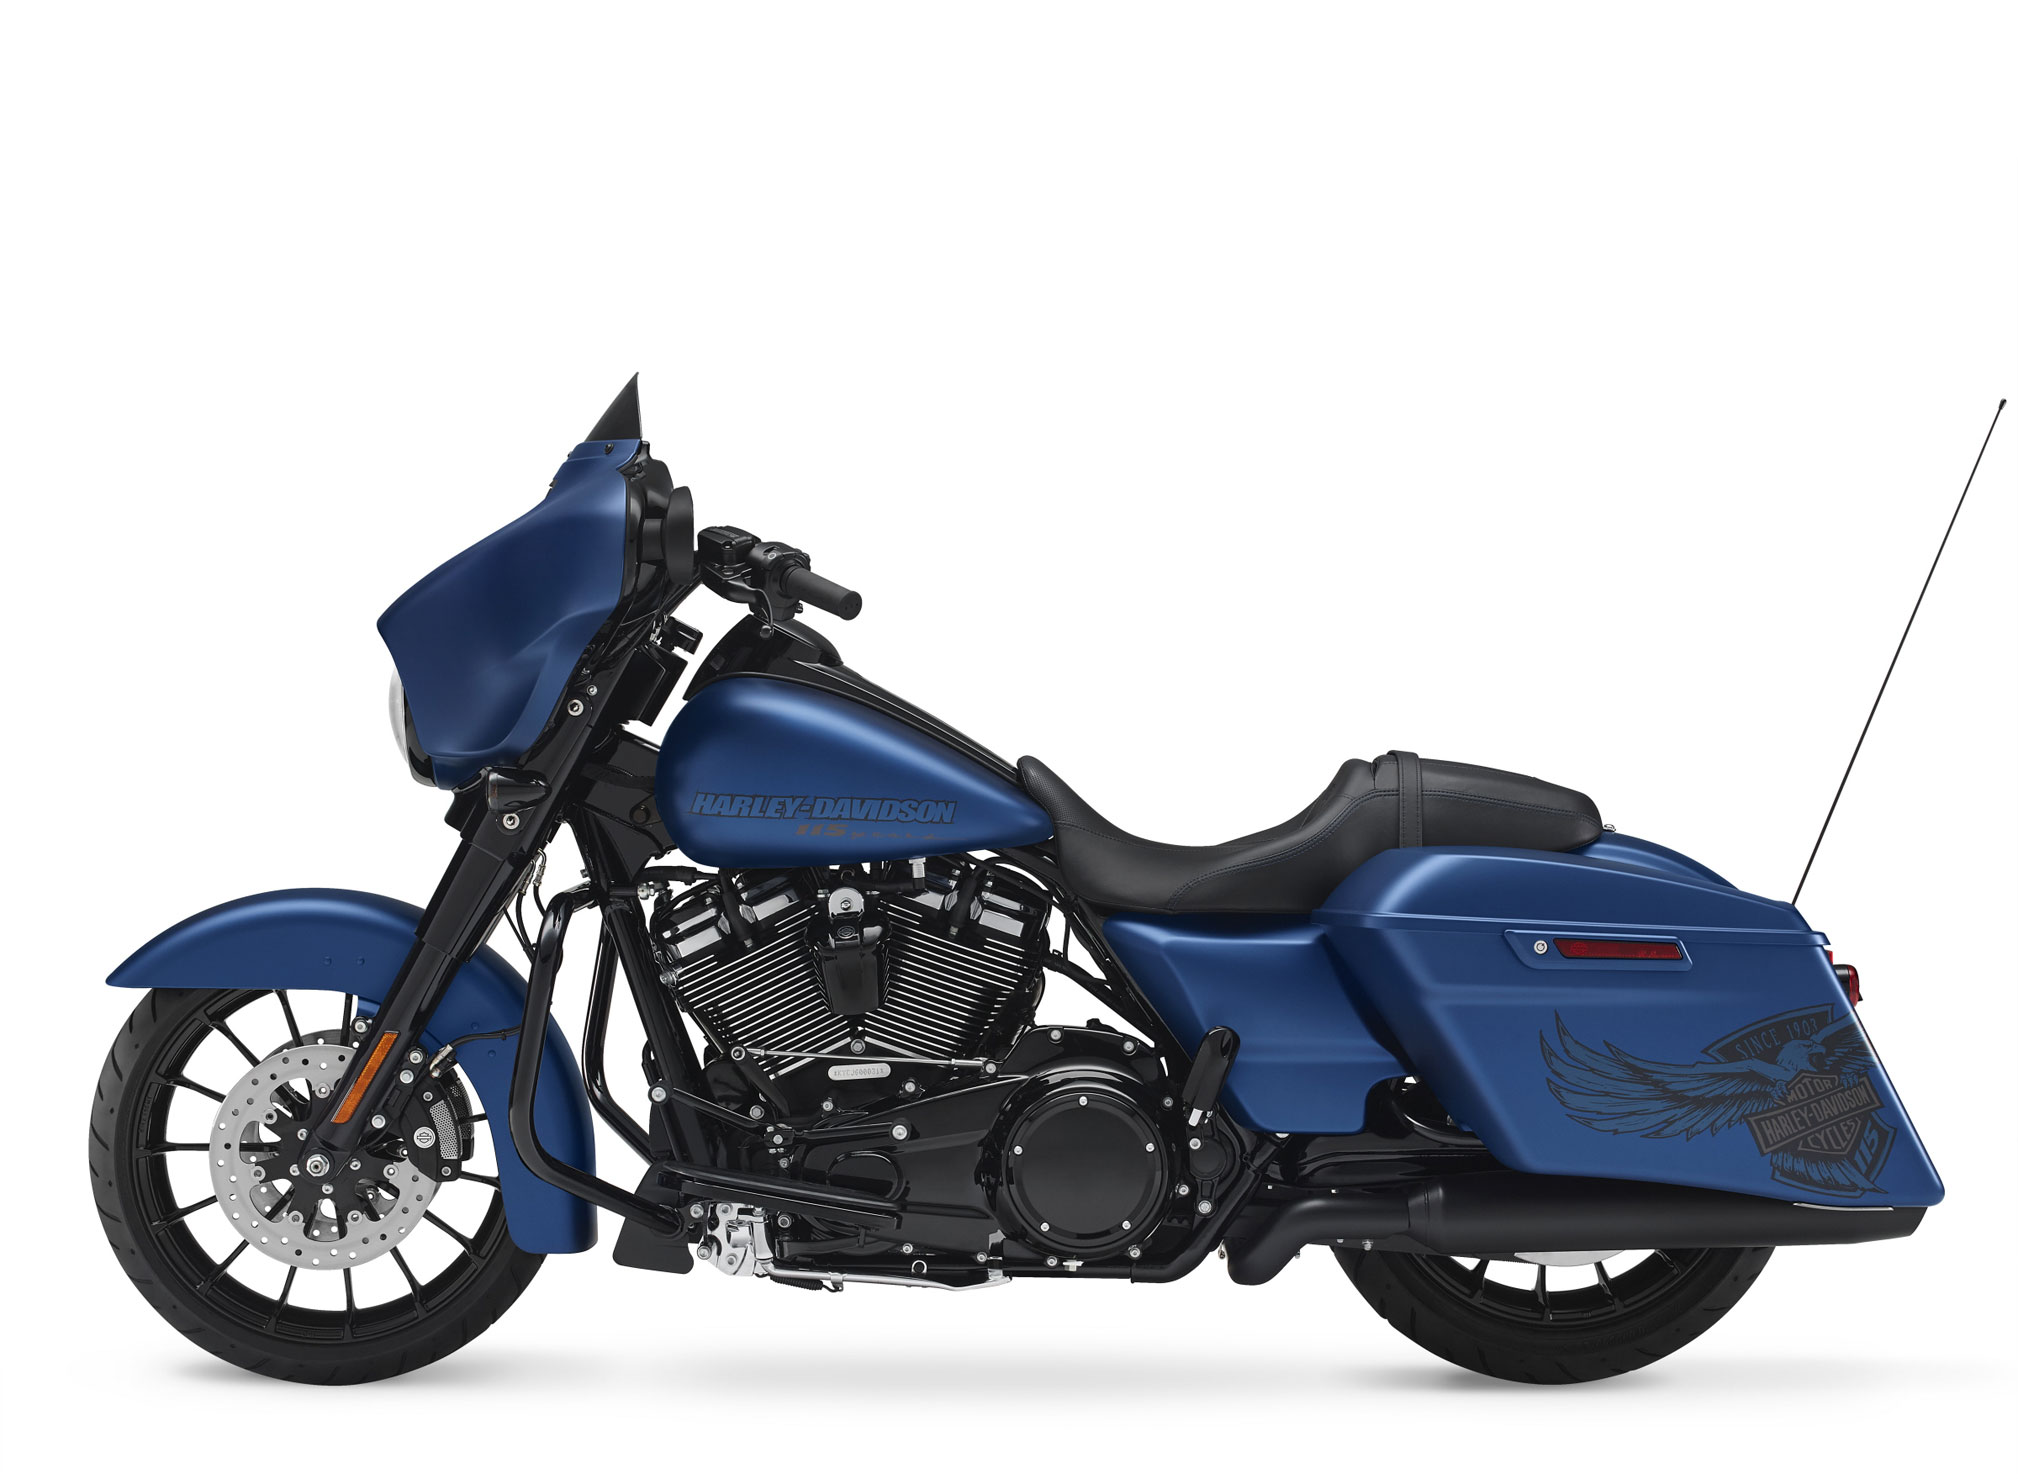 2018 Harley Davidson Street Glide Special 115th Anniversary Review Total Motorcycle